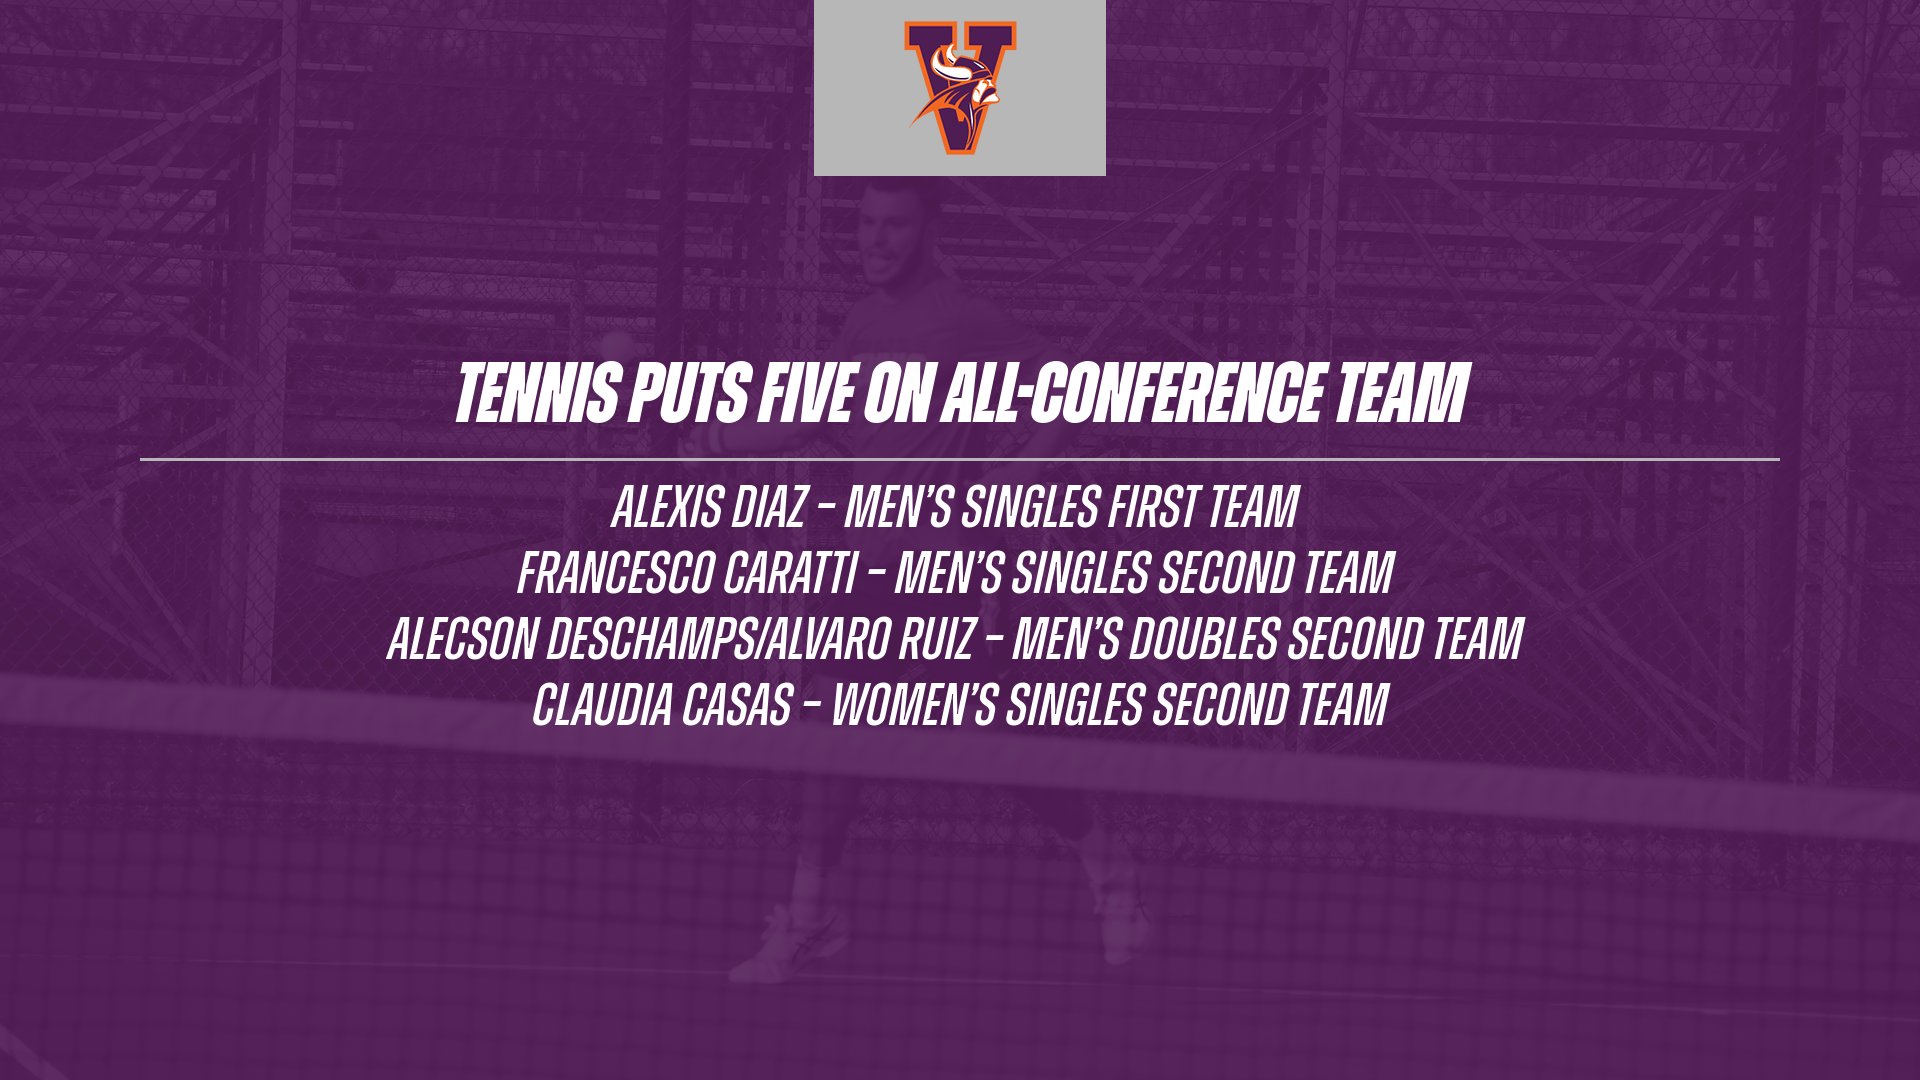 Tennis Puts Five Student-Athletes on All-Conference Team